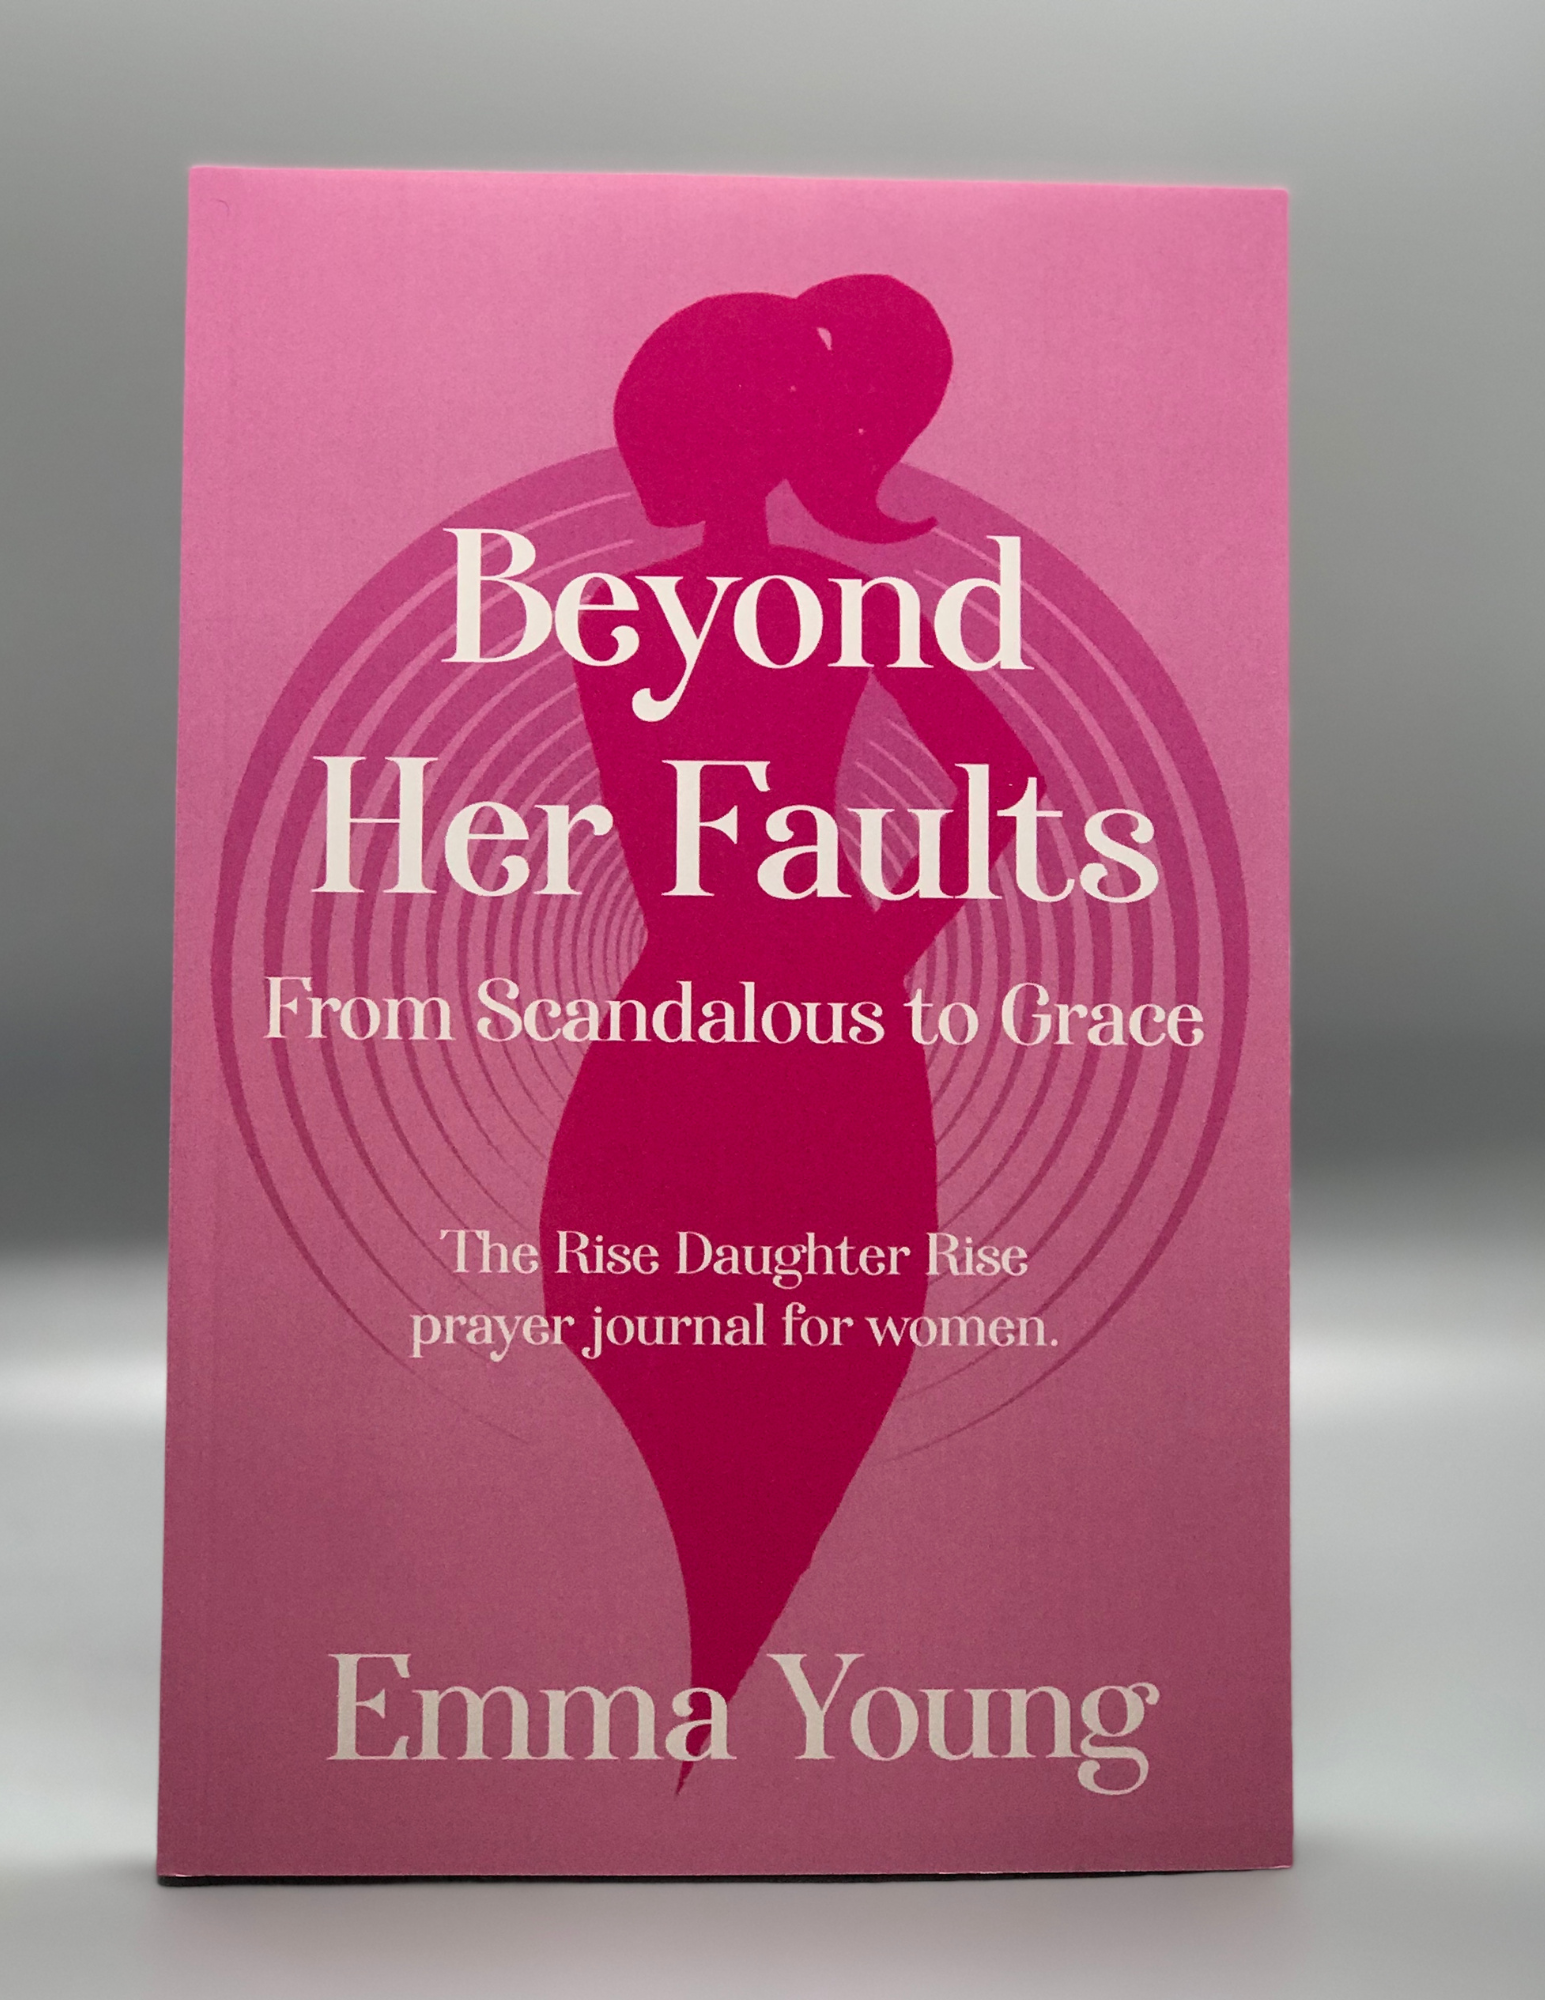 Frontal view of pink book cover with centered woman's silhouette.